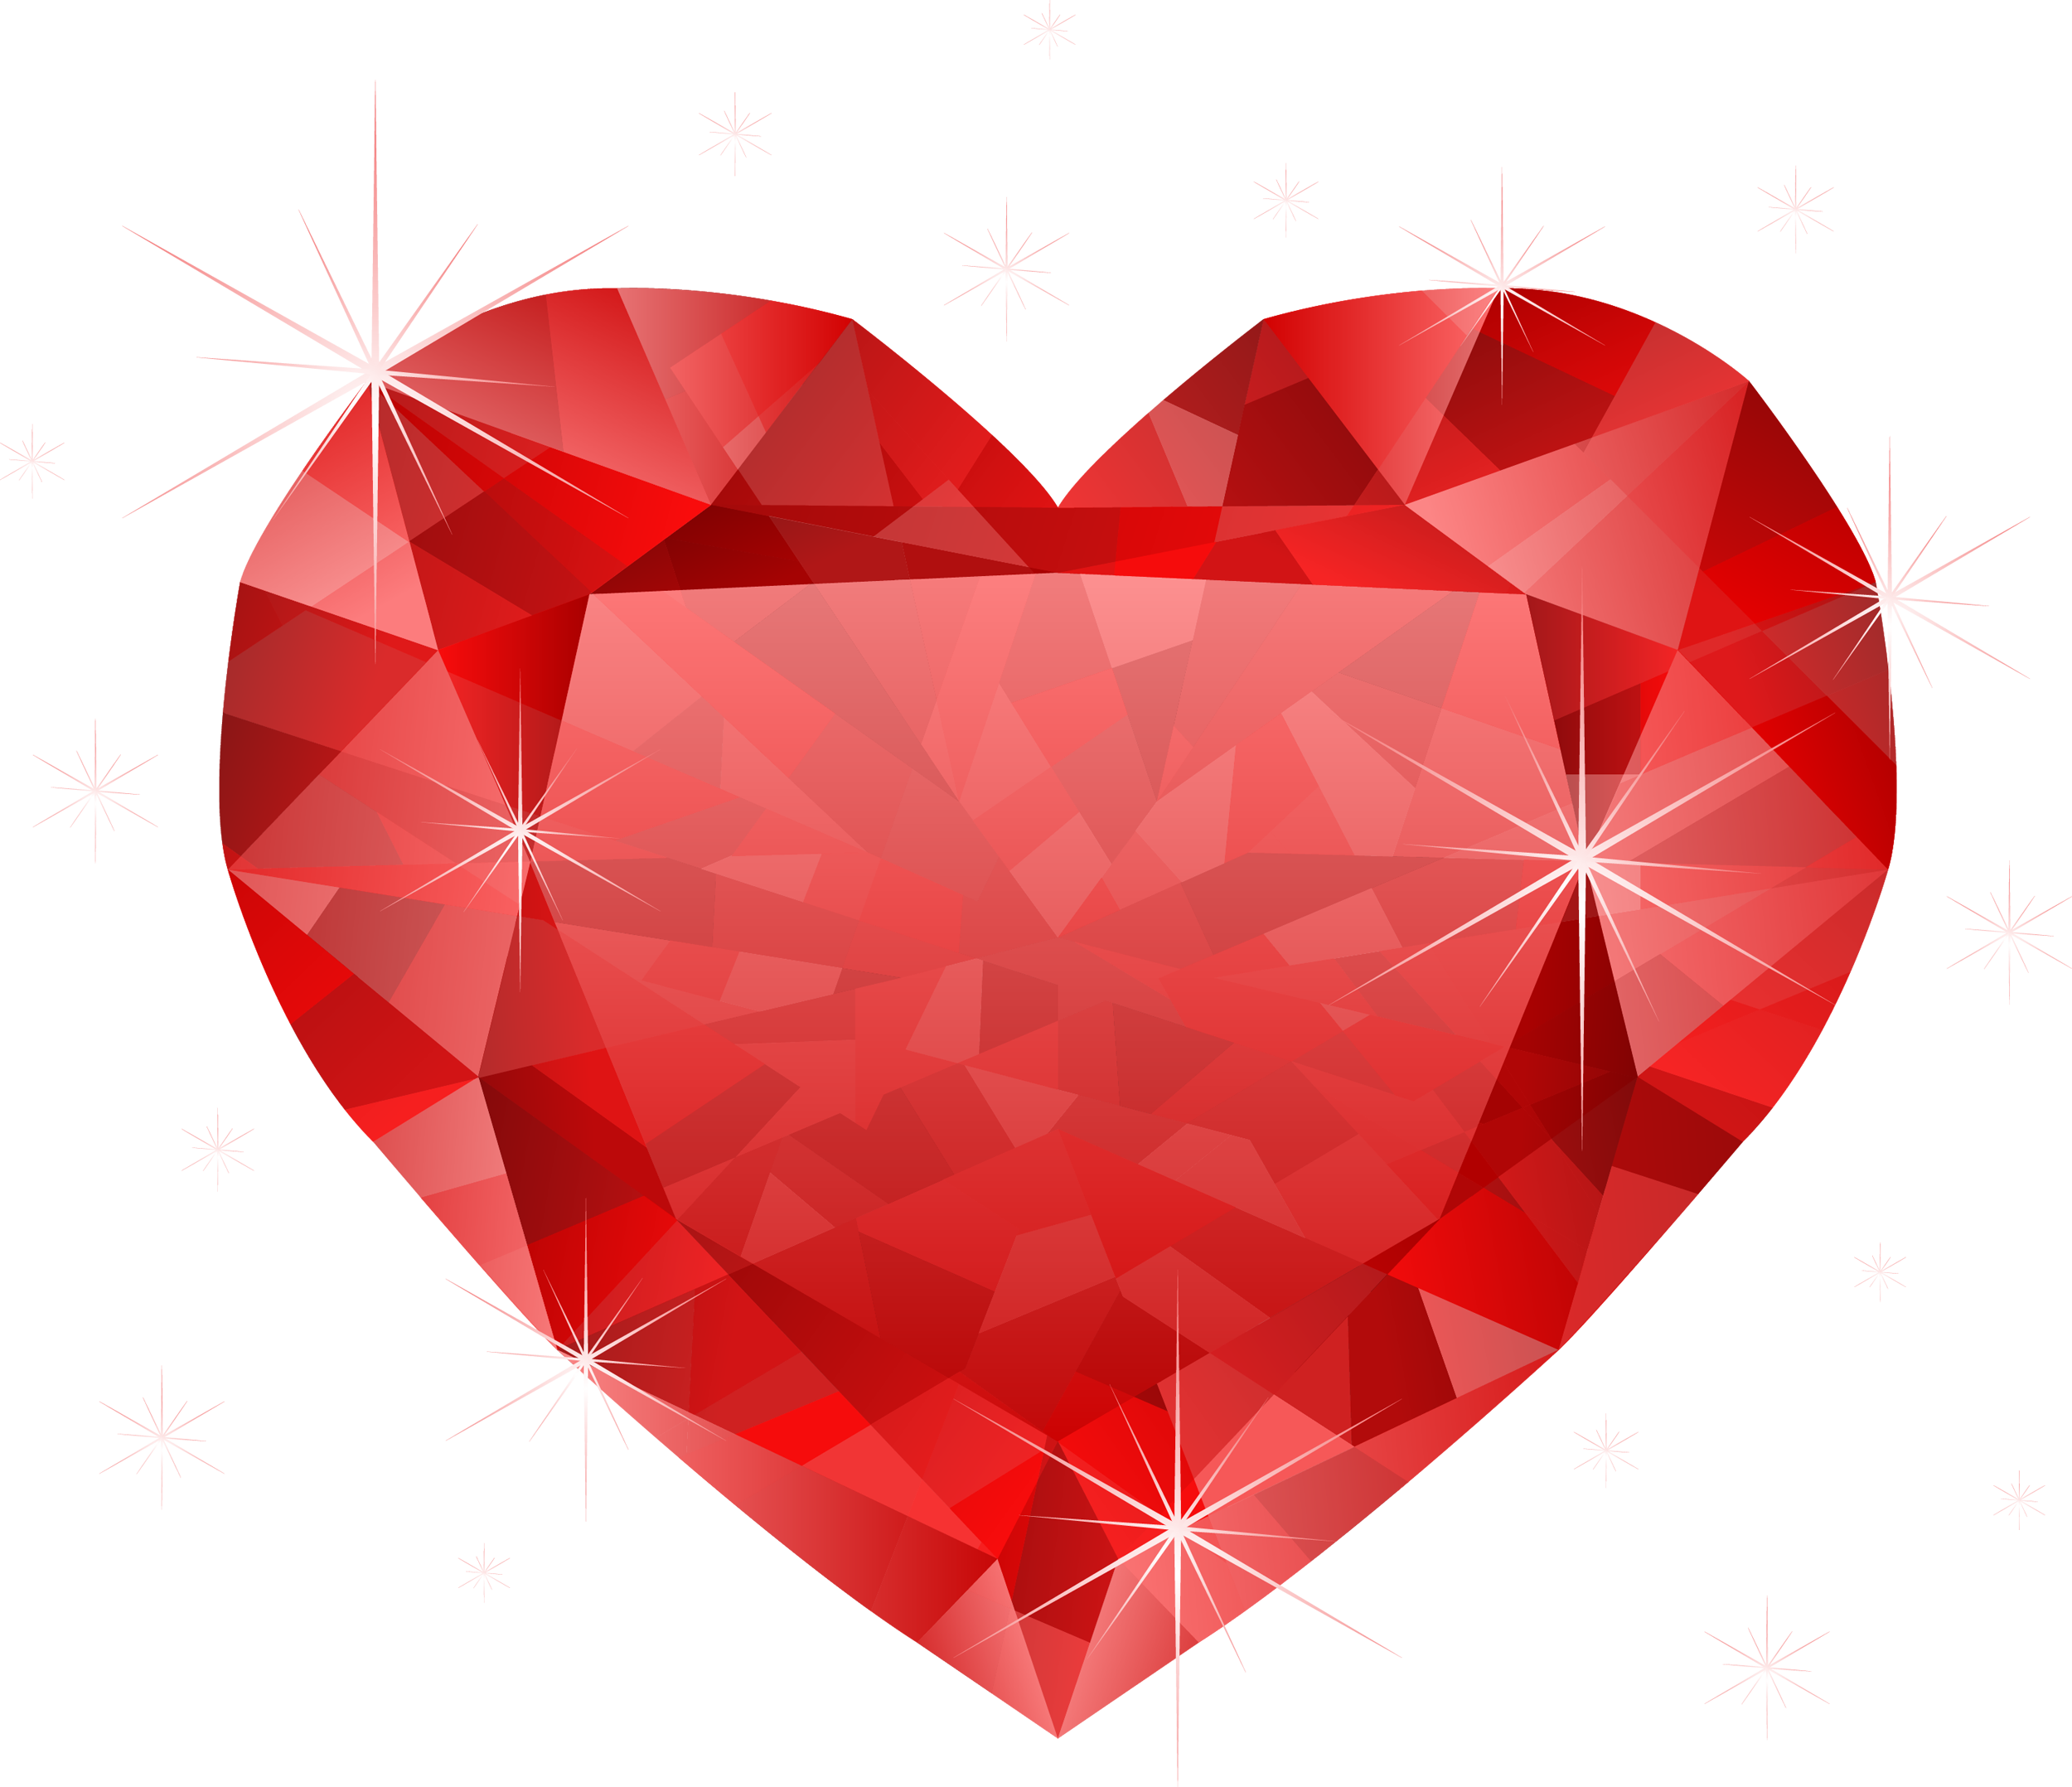 Diamond red heart PNG